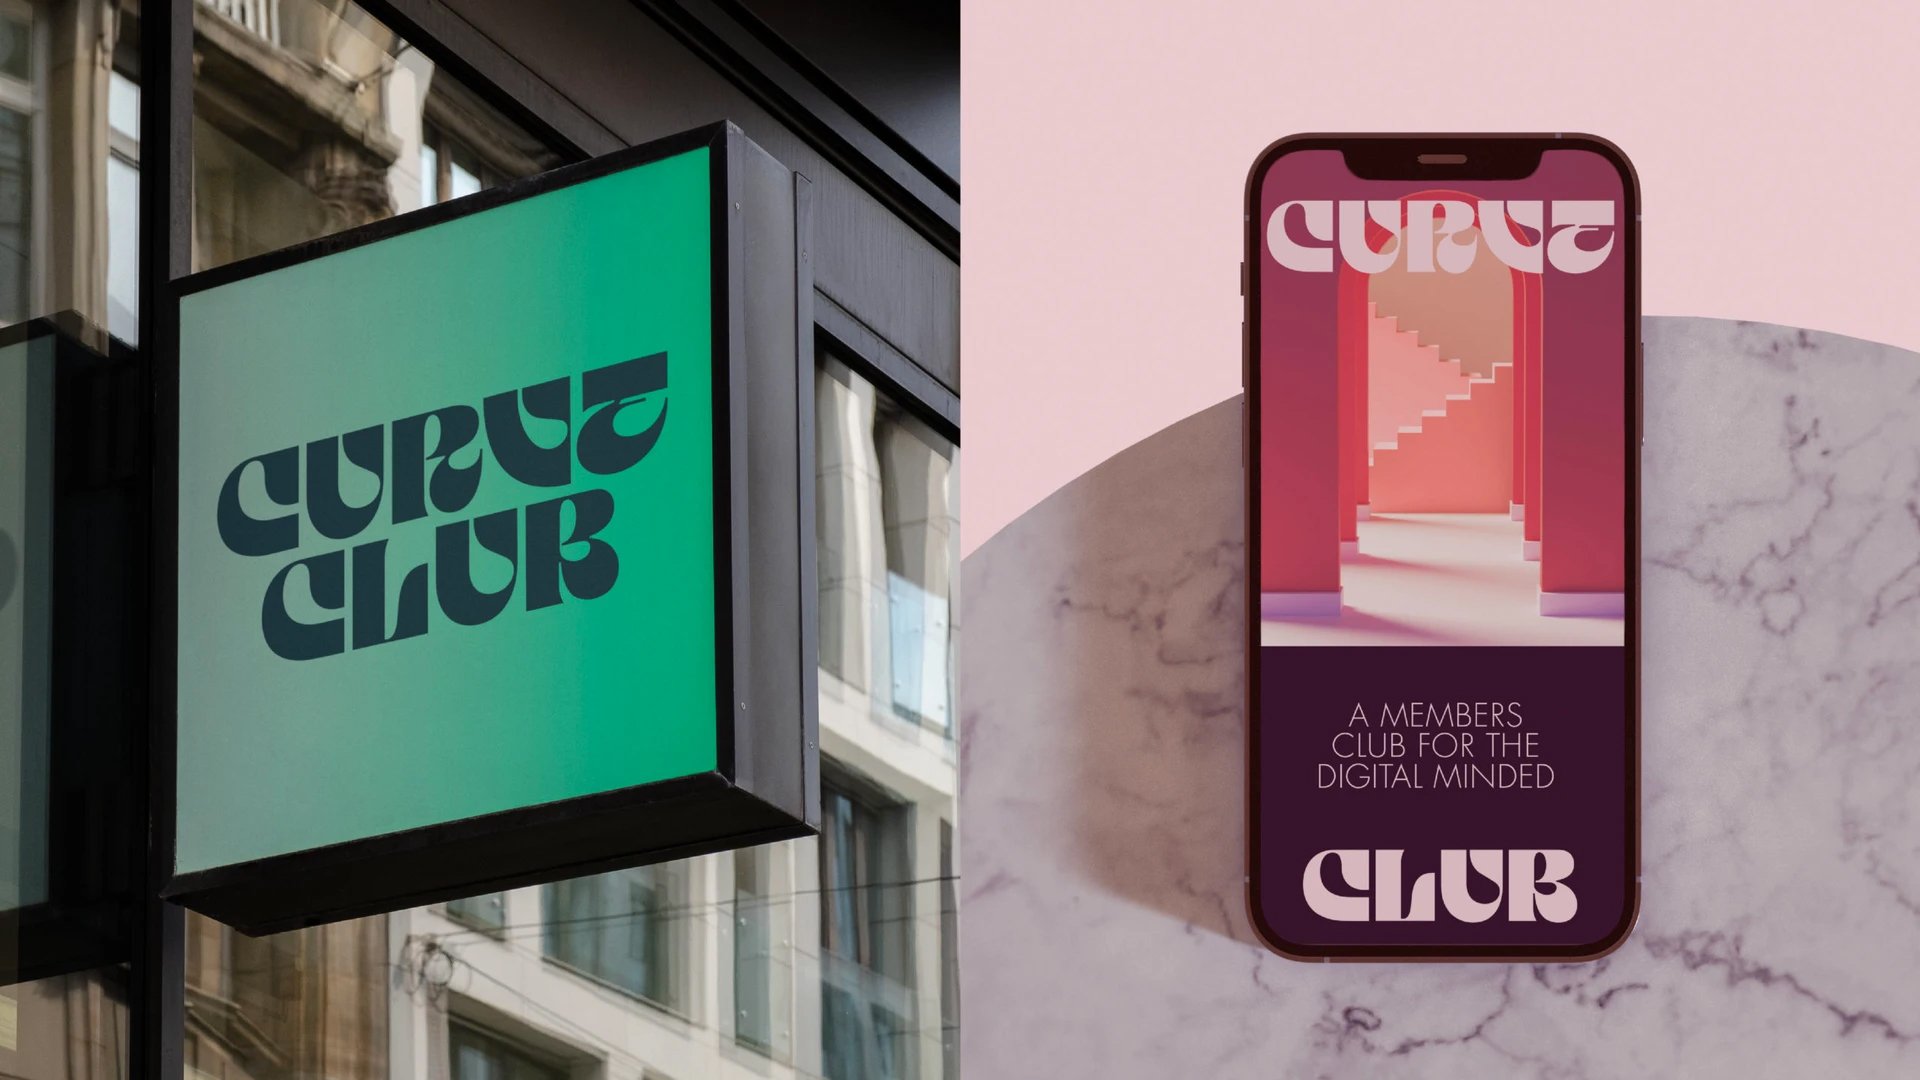 New logotype and visual identity for luxury private members club Curve Club designed by Wildish & Co. 